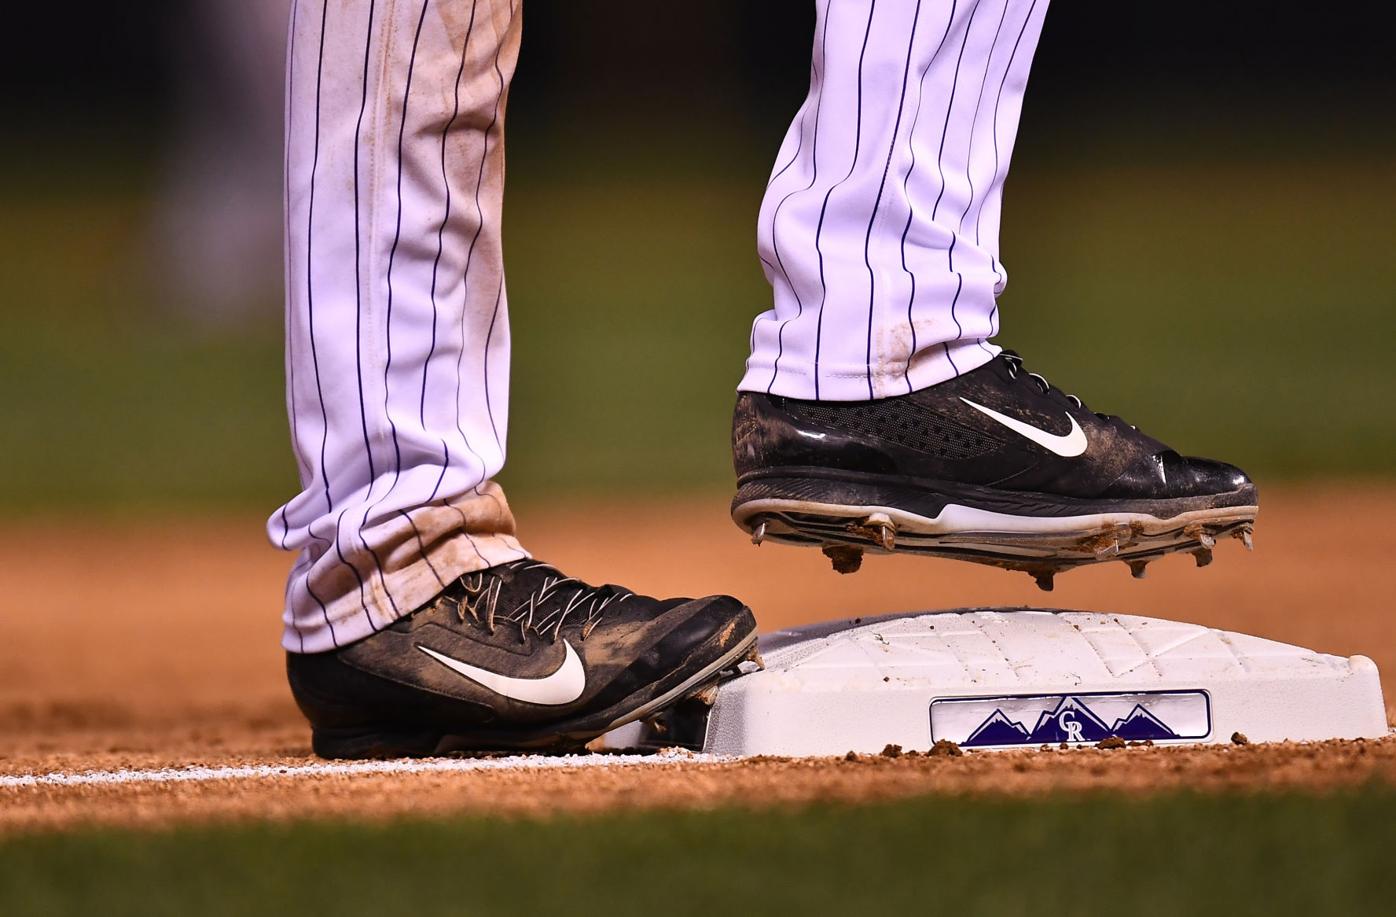 Nike to become MLB's uniform supplier in 2020, Sports